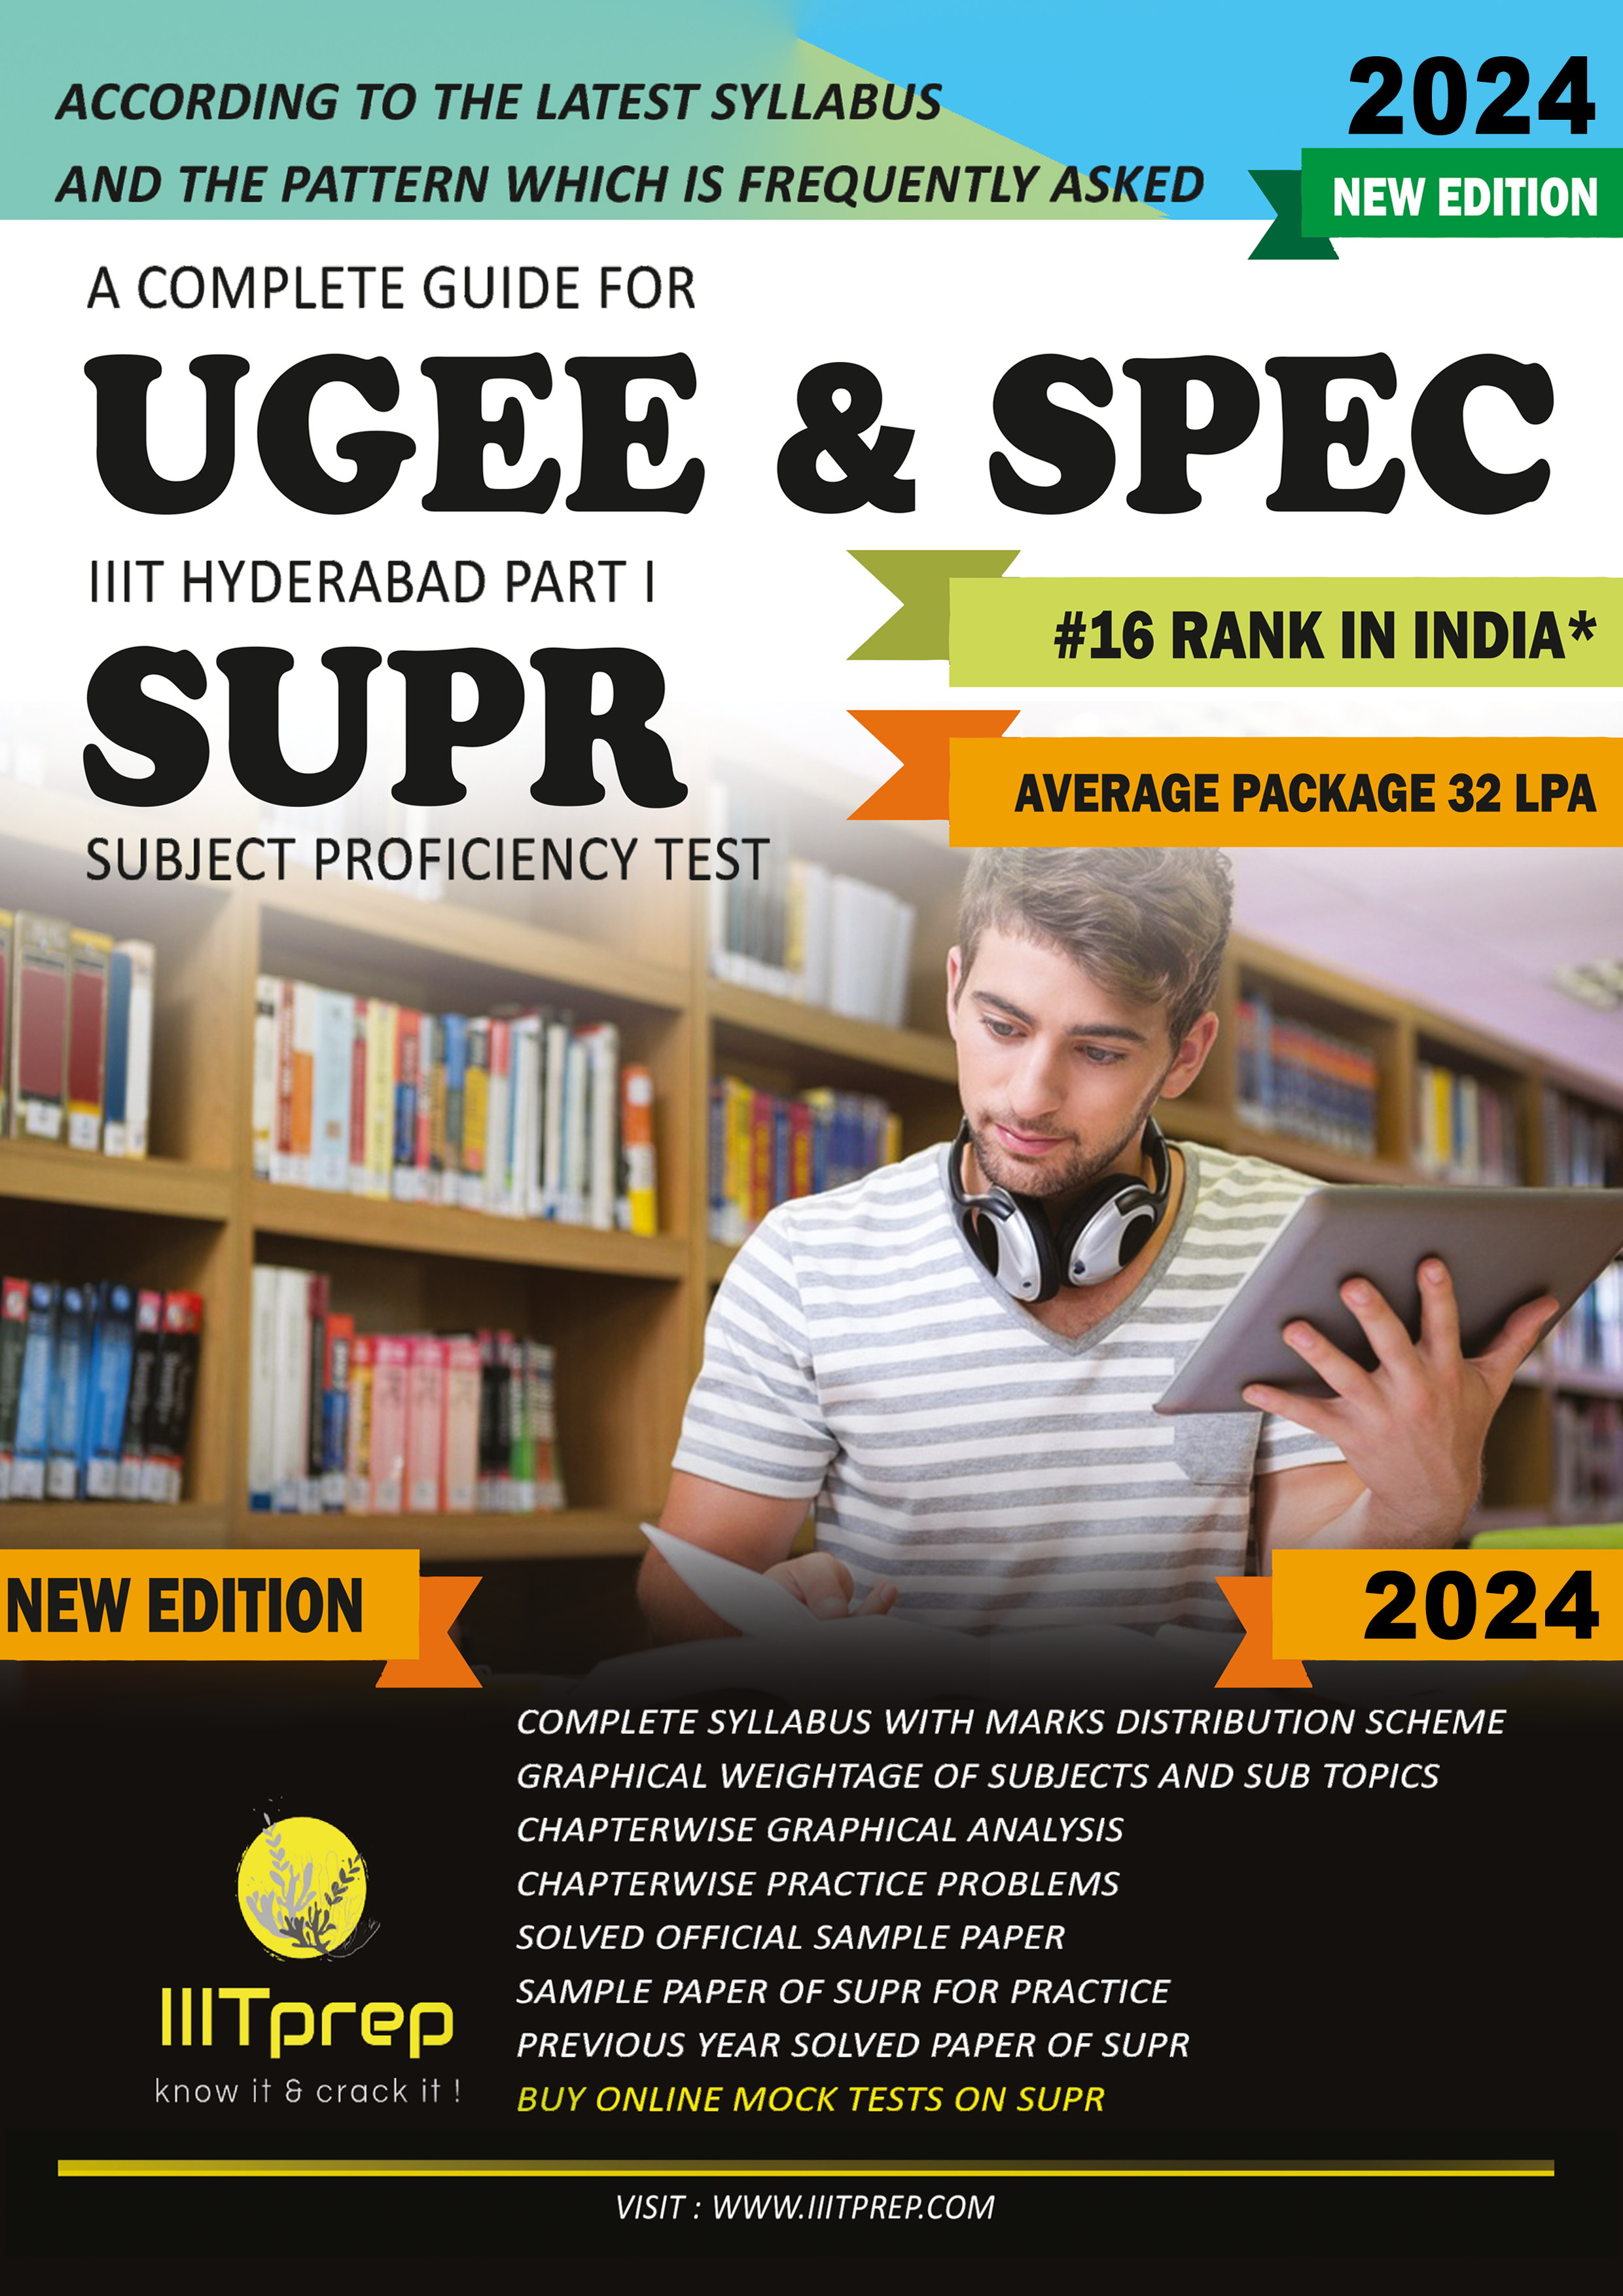 UGEE 2023 SUPR Cover